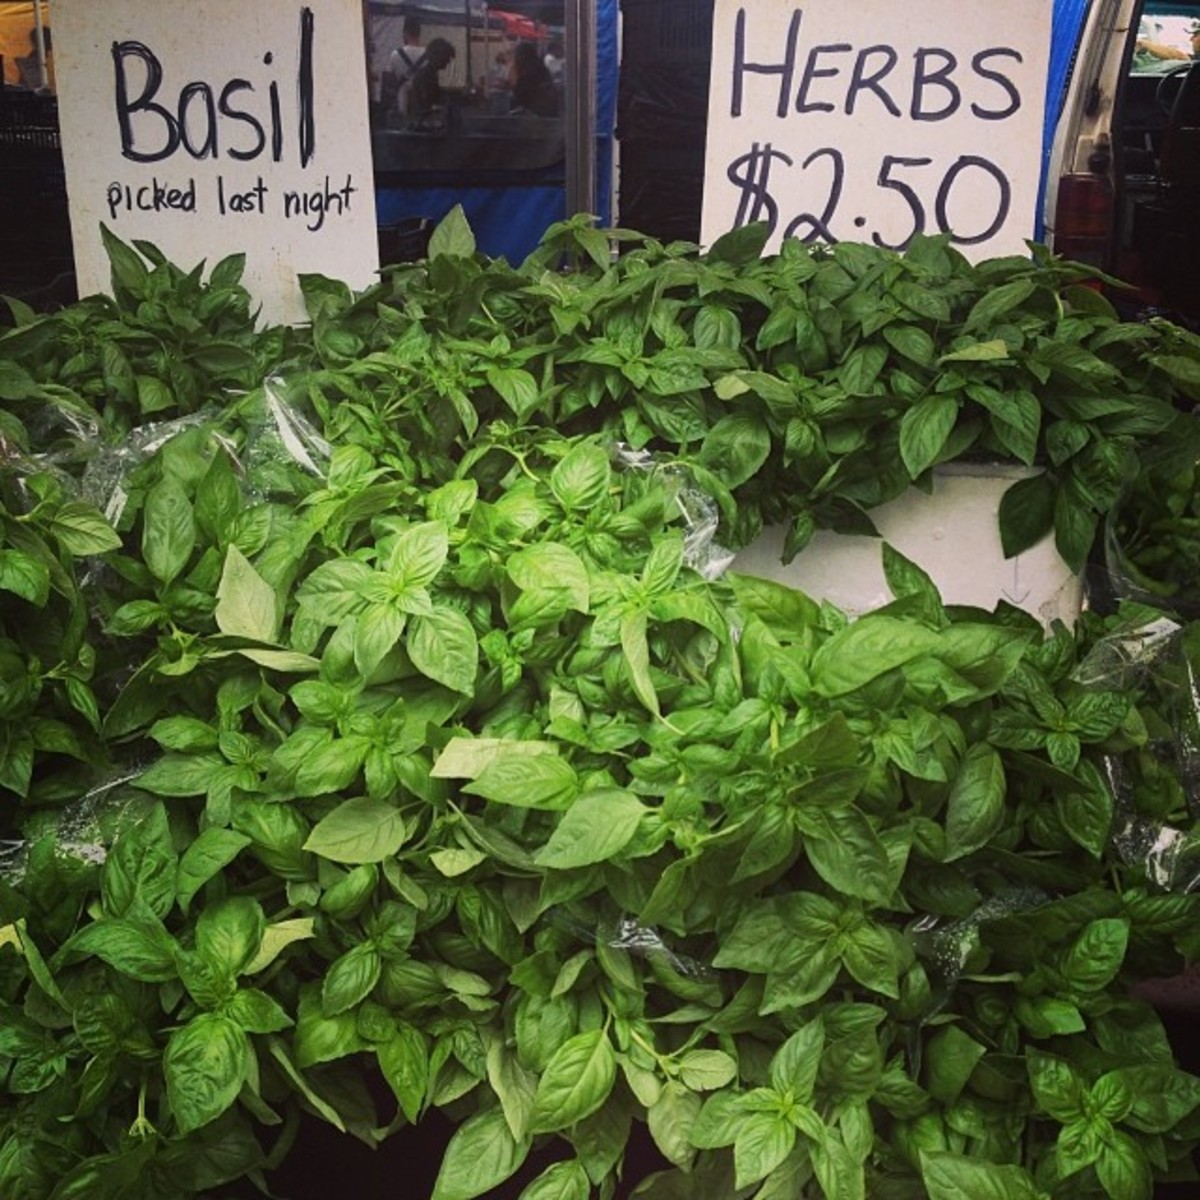 25 Percent of Farmers Market Fresh Herbs Tested Positive for E. Coli